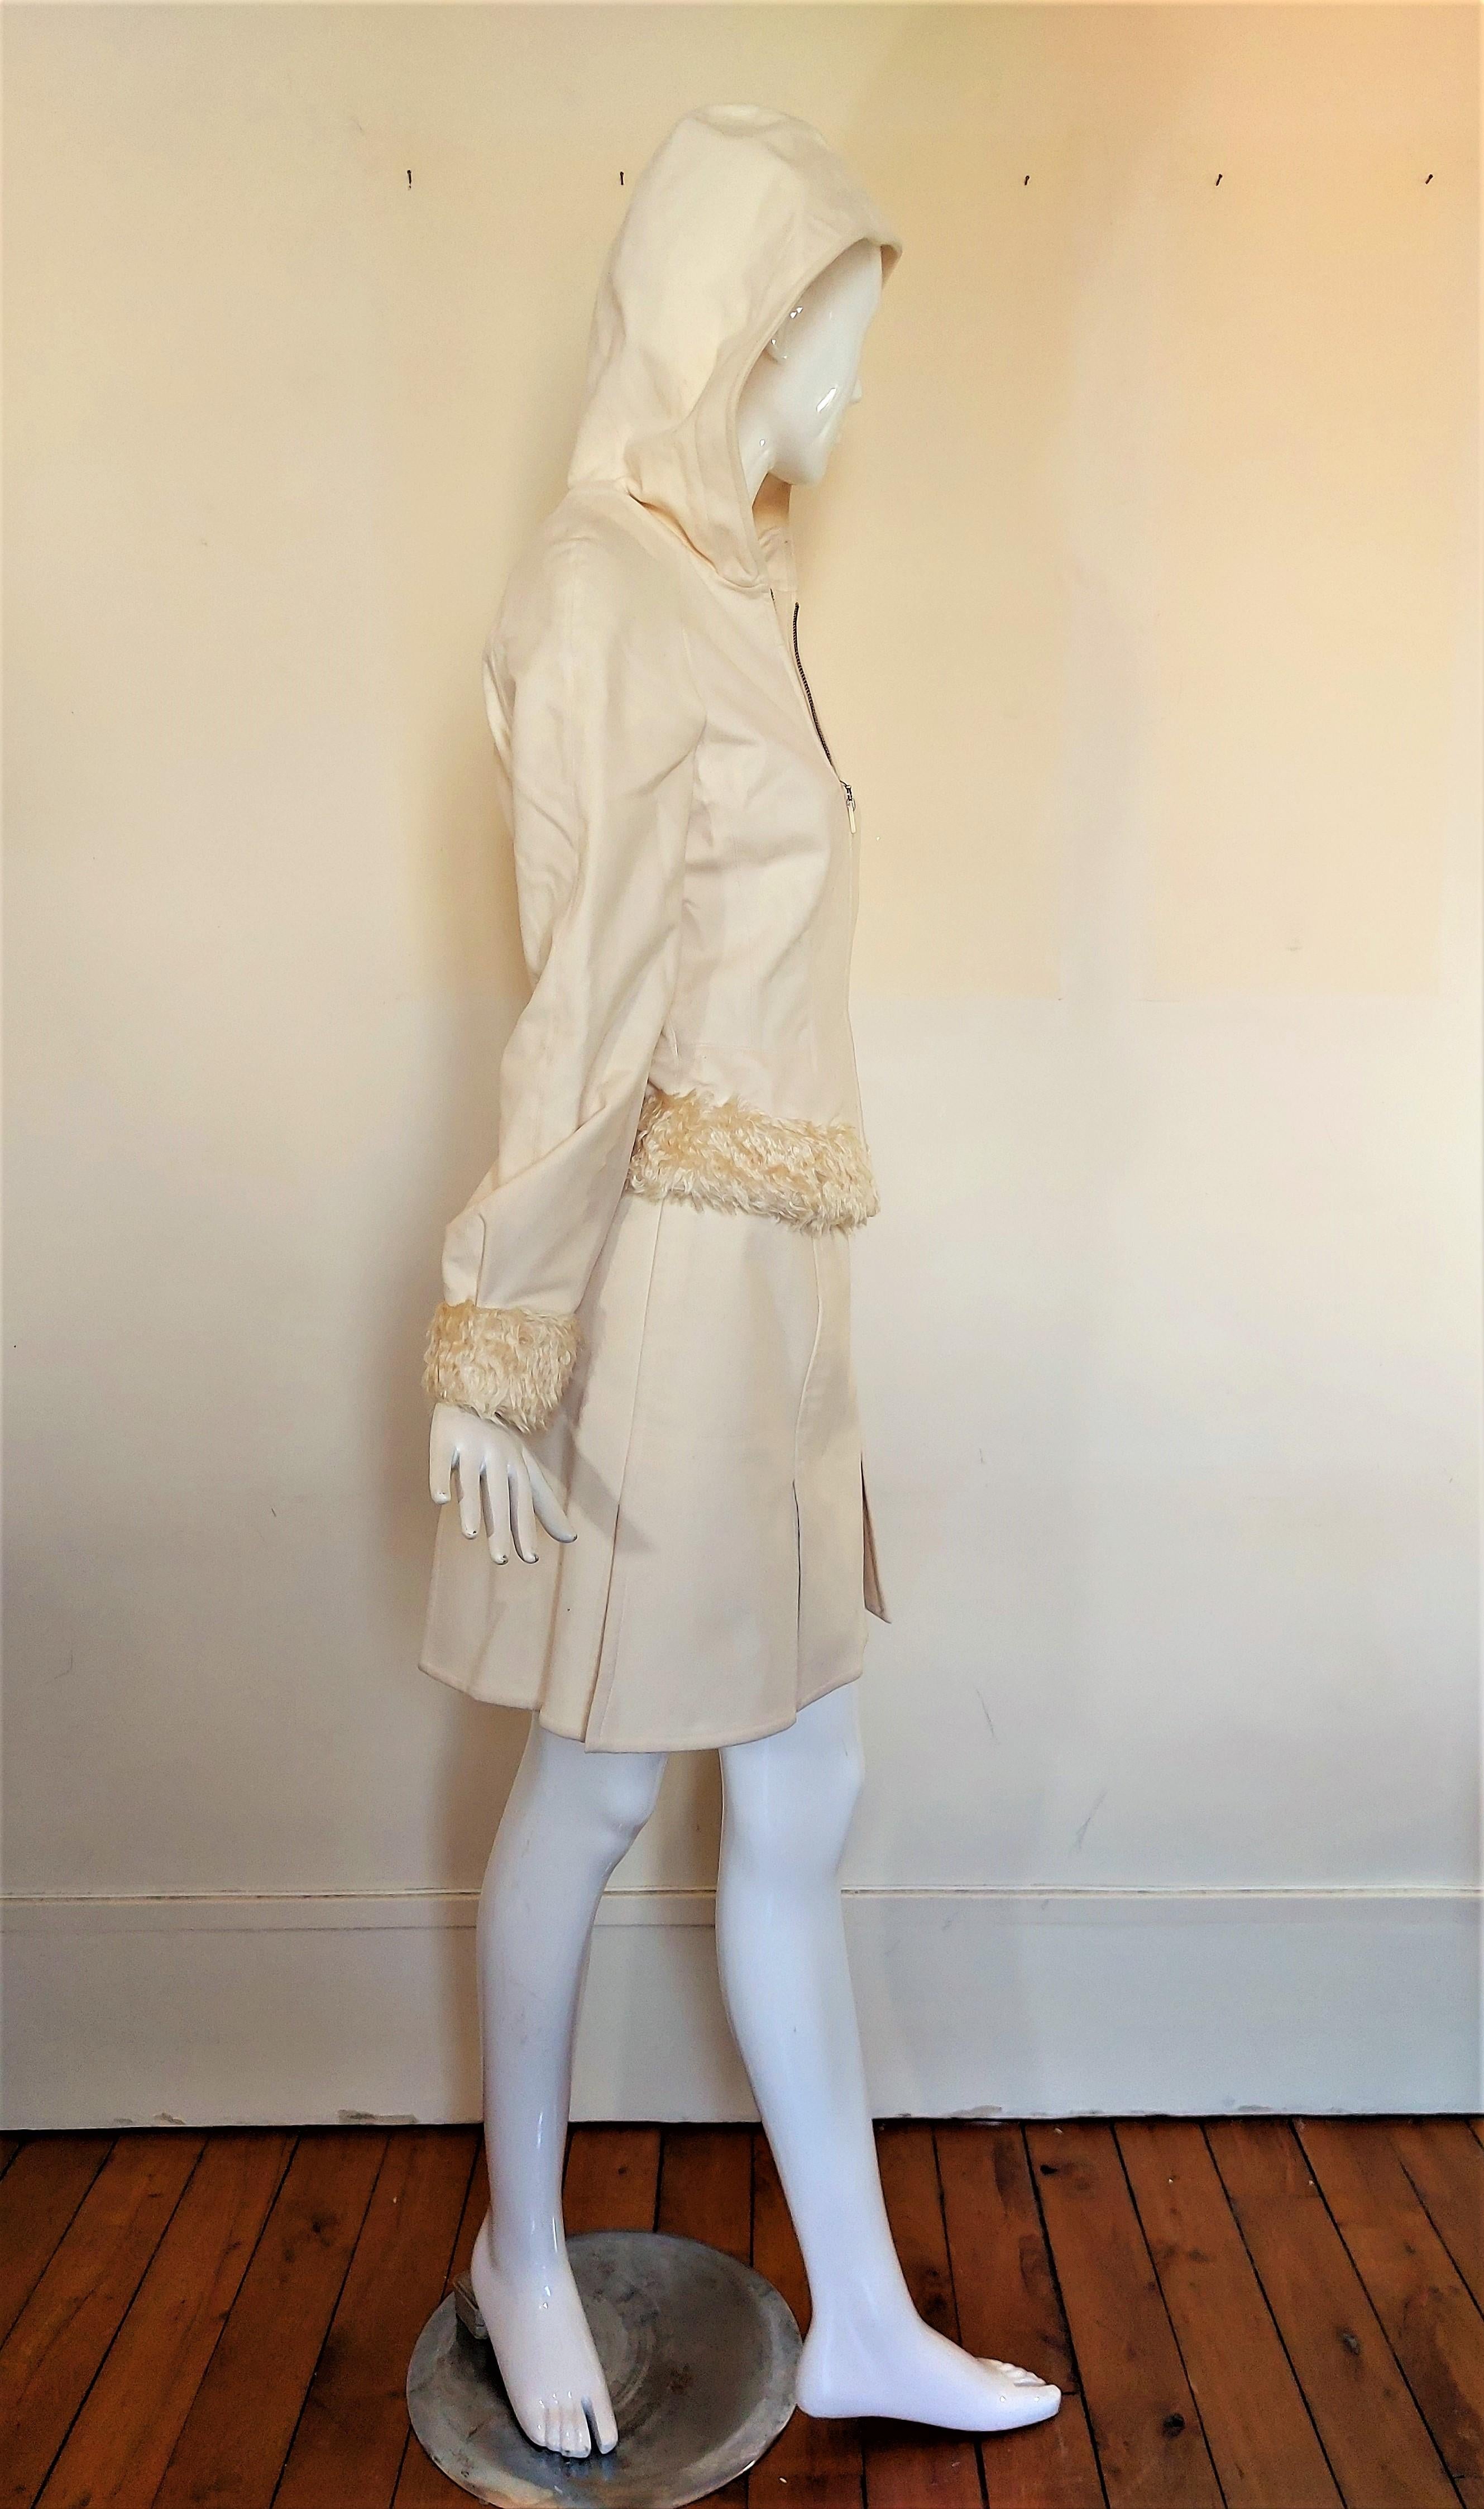 Thierry Mugler White Faux Fur Beige Snow  90’s Elegant Formal Vintage Winter Warm 3 Pieces Set Trousers Jacket Coat Skirt Suit

3 pieces set (Jacket, Skirt and Pants) from Thierry Mugler in Excellent Condition.
Hooded Jacket with Faux fur.
Marked